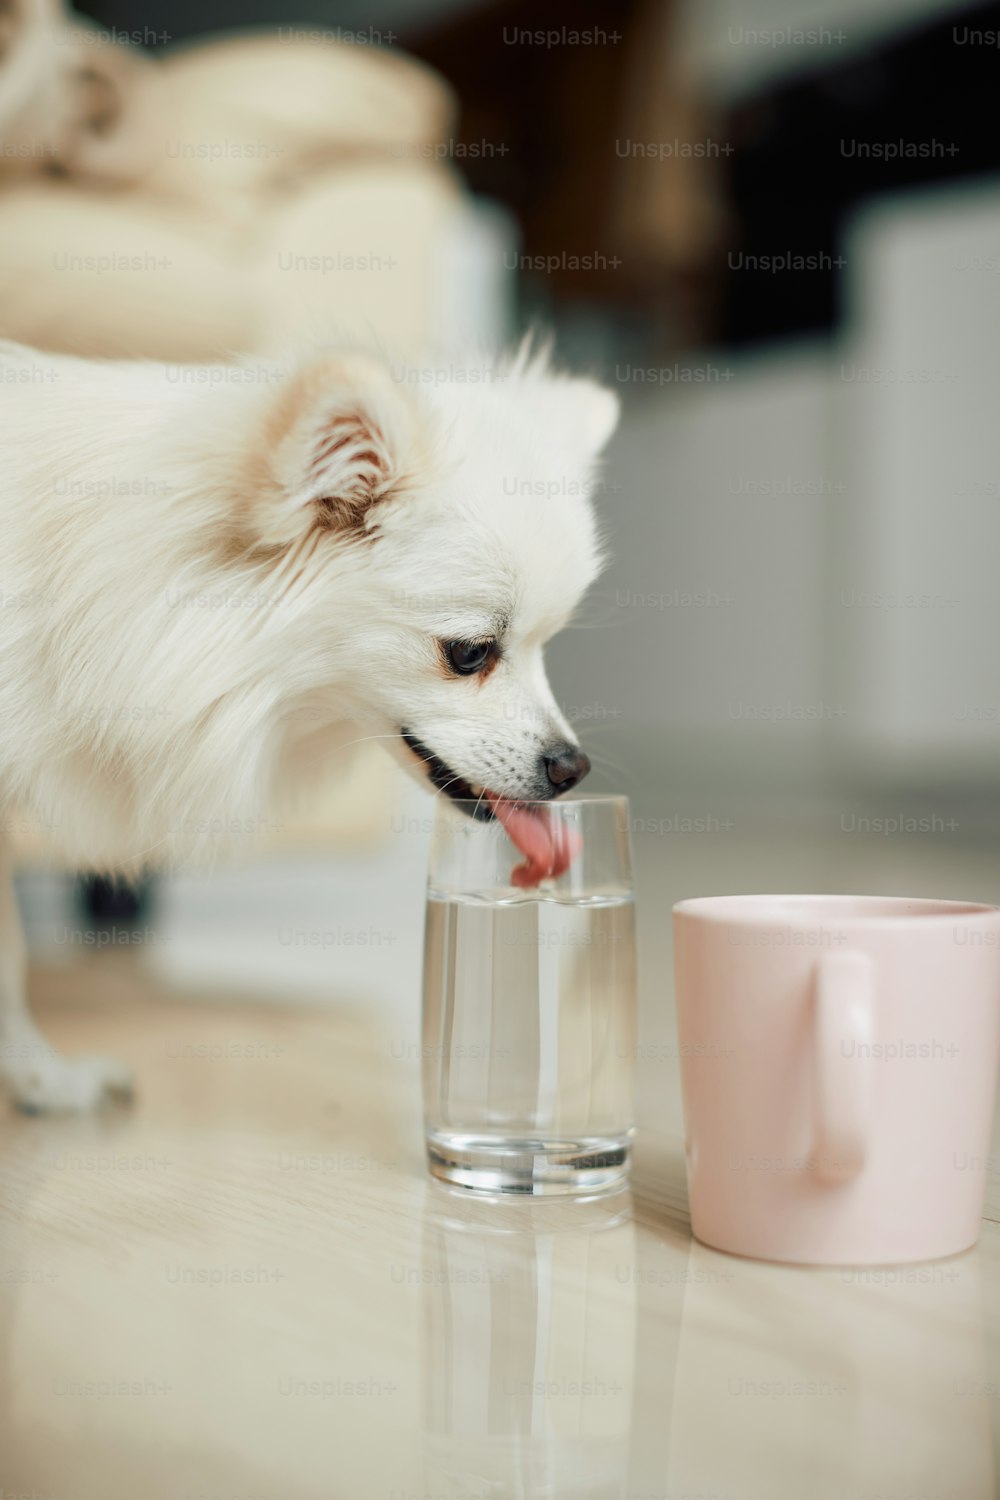 Thirsty dog drinking water from a glass at home.